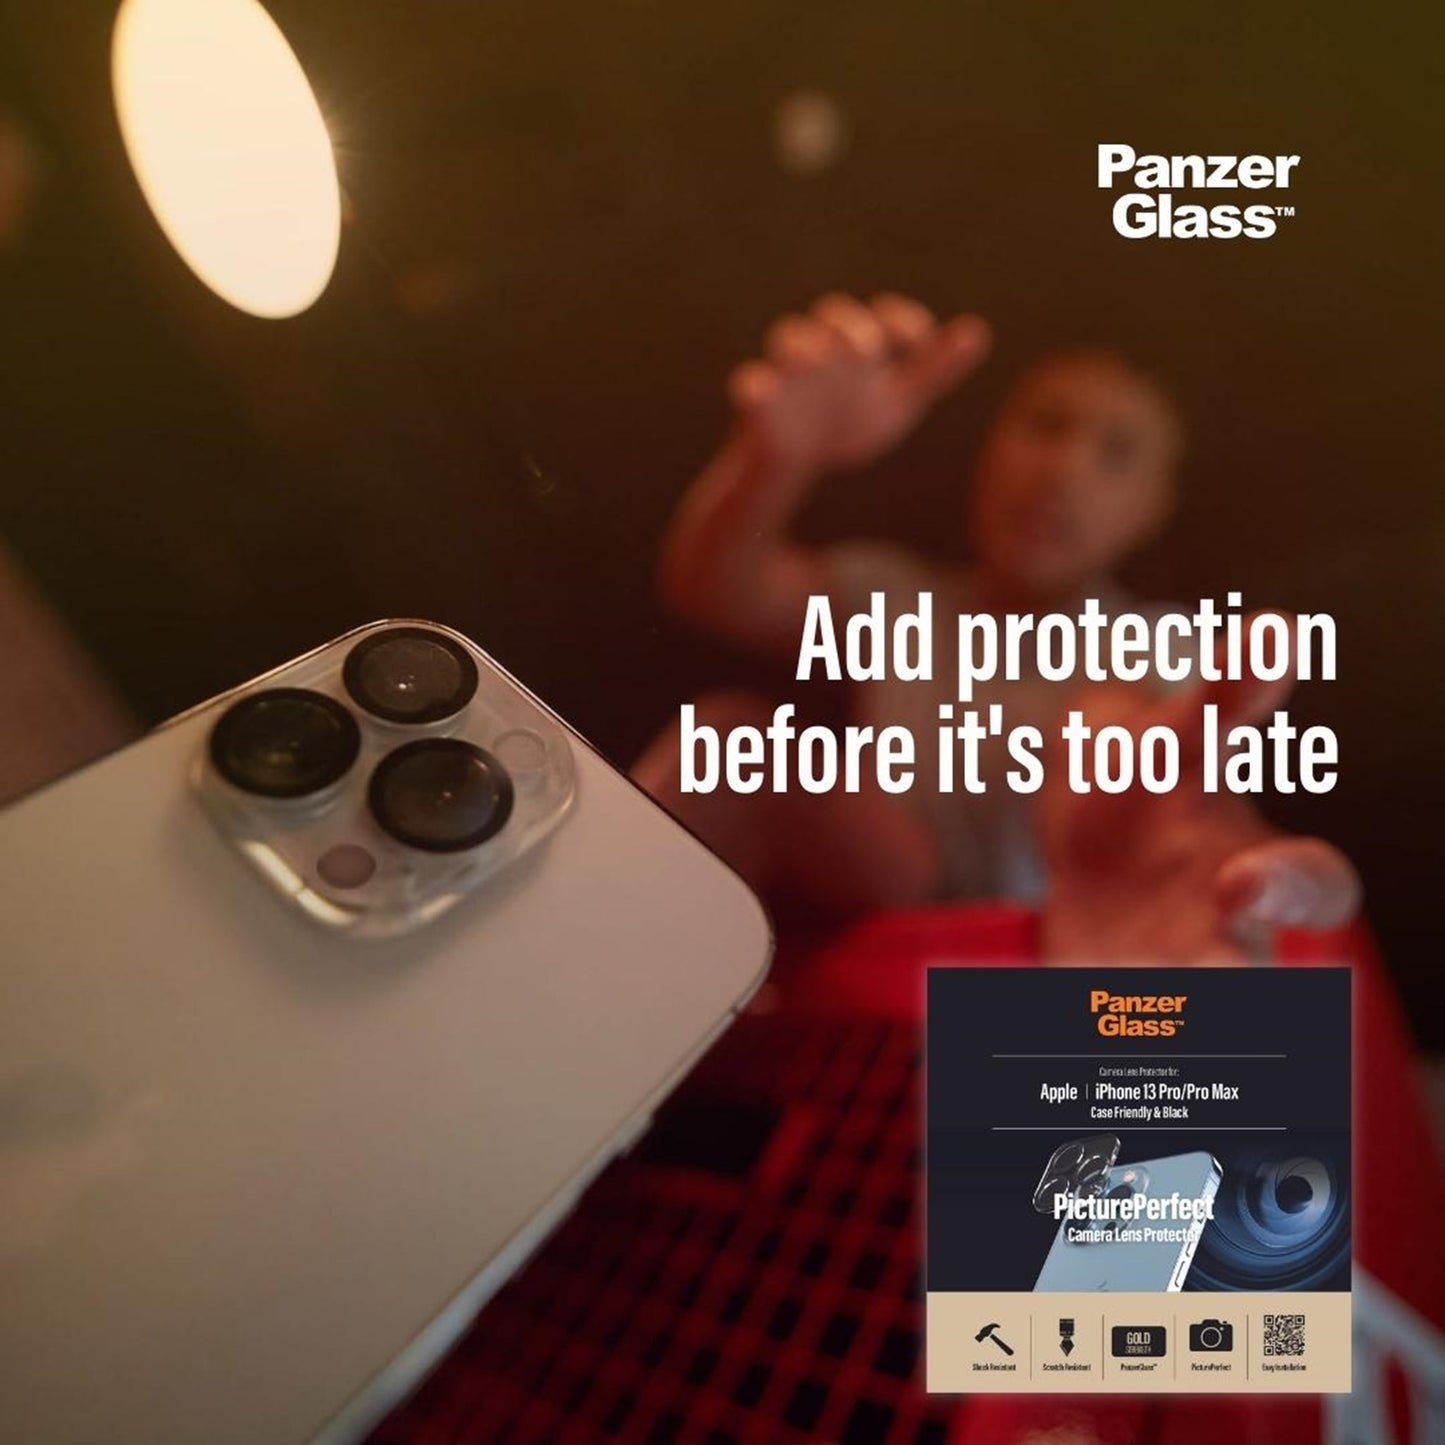 PanzerGlass™ PicturePerfect Camera Lens Protector Apple iPhone 13 Pro | Pro Max 11